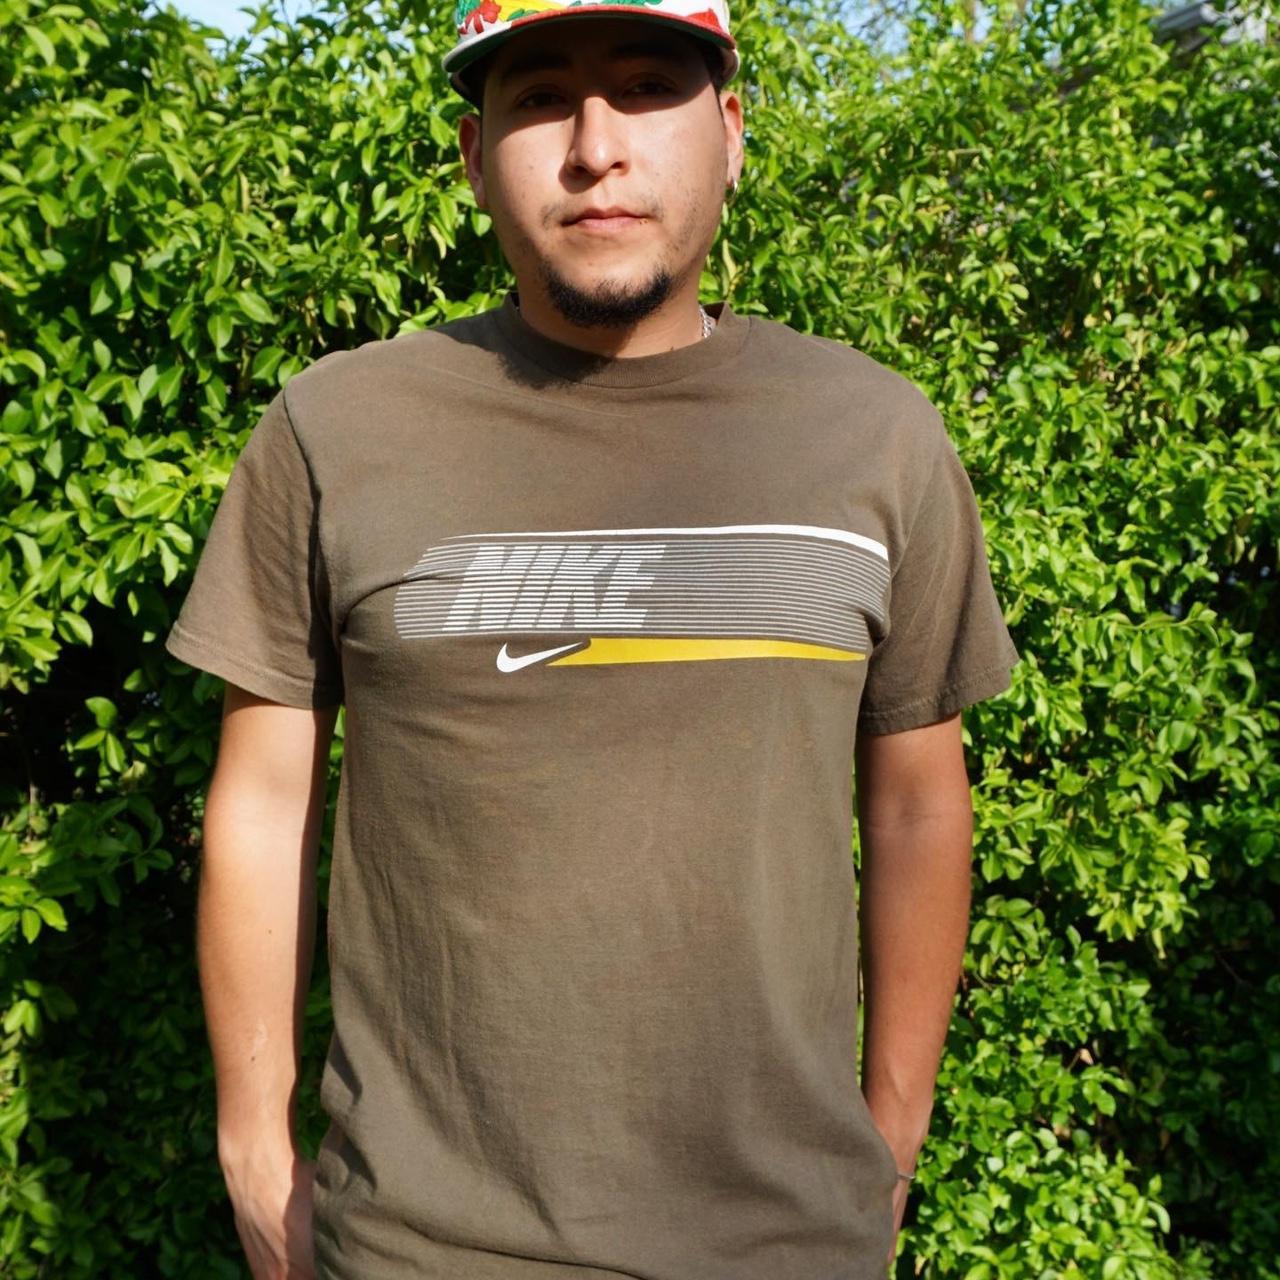 Early 2000’s Nike Shirt, Olive colorway with white